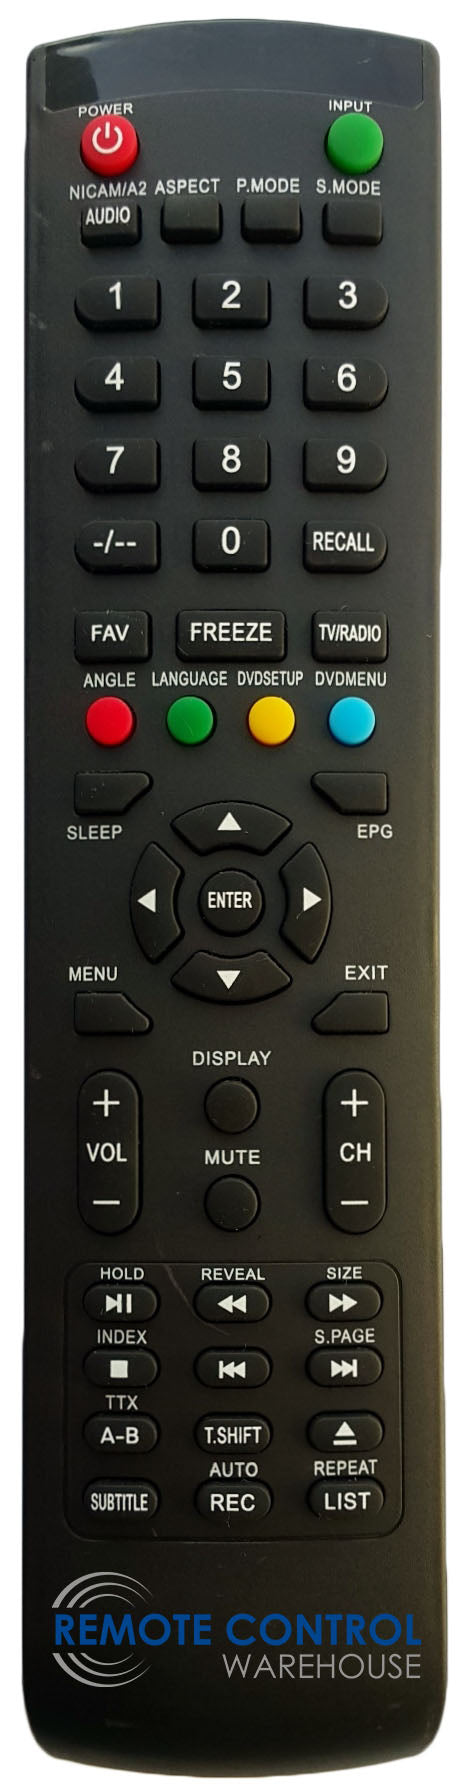 Palsonic TFTV4355M LCD TV Replacement Remote Control